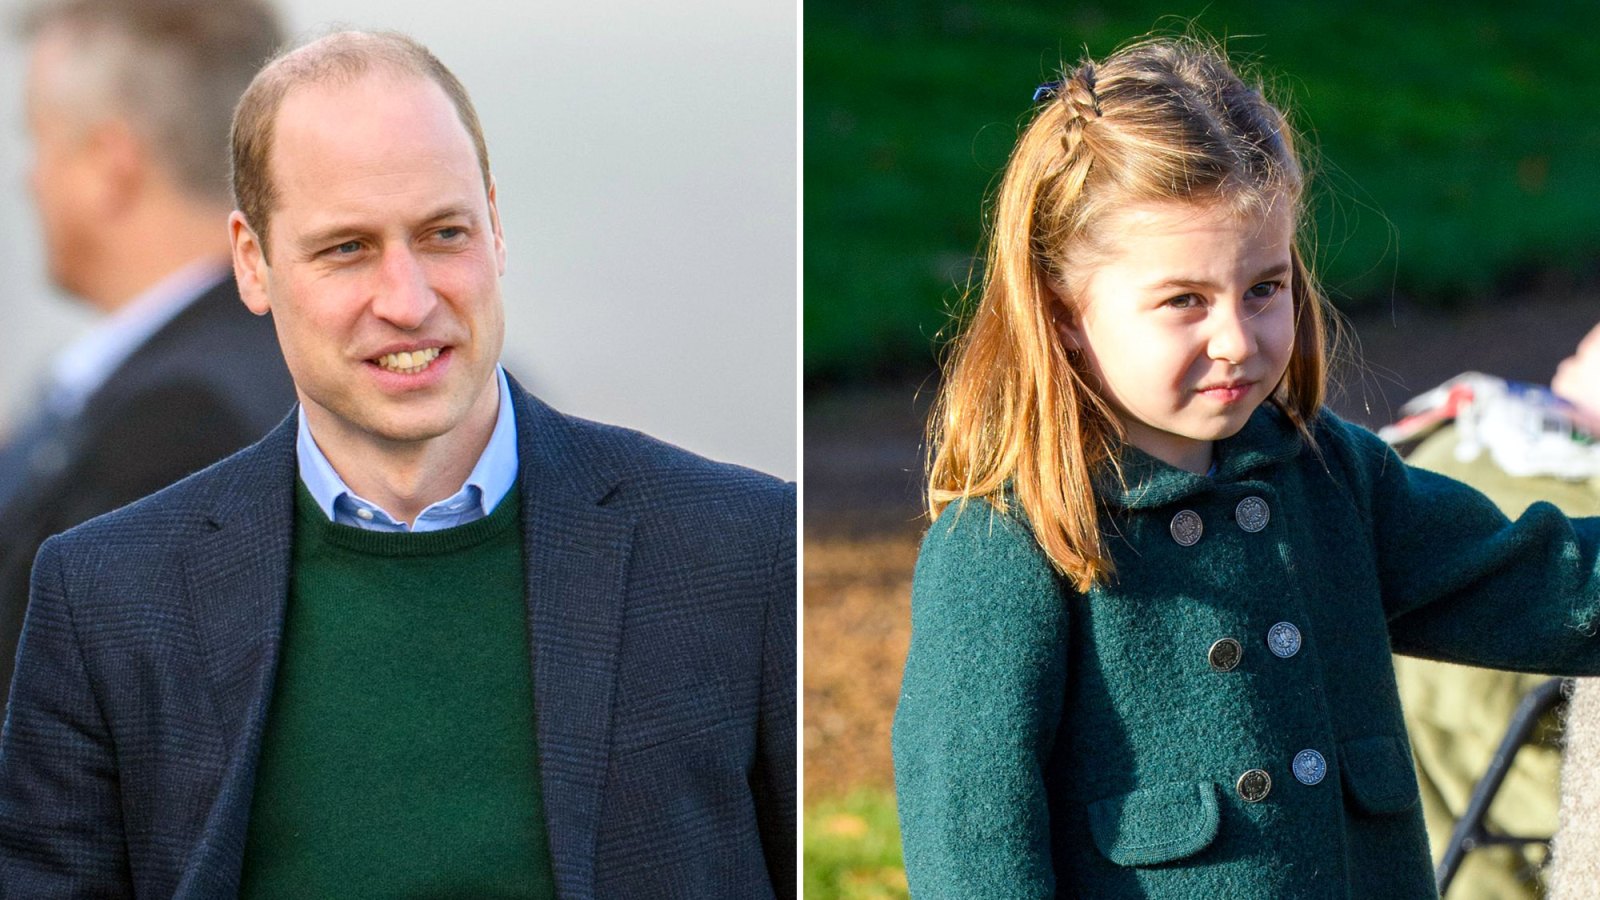 Prince William Sweetly Responds to Fan Telling Him Princess Charlotte Is Her Favorite